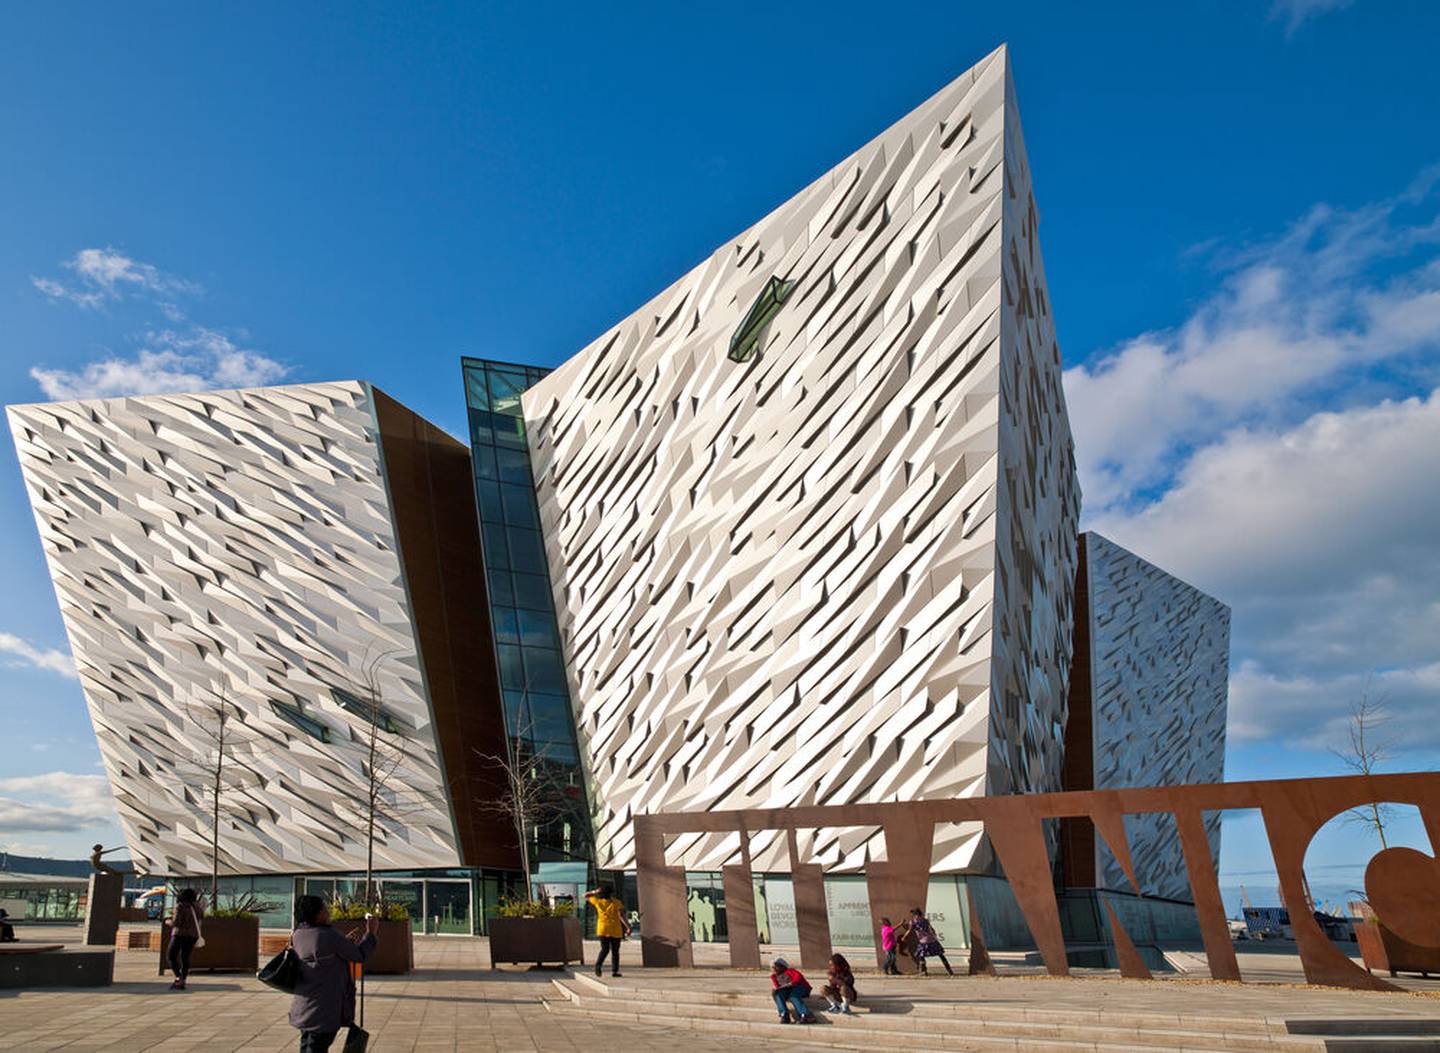 Built on the slipways where the ship itself was constructed more than 100 years ago, Titanic Belfast will reopen in February with a new interactive exhibit. Photo: Tourism Ireland